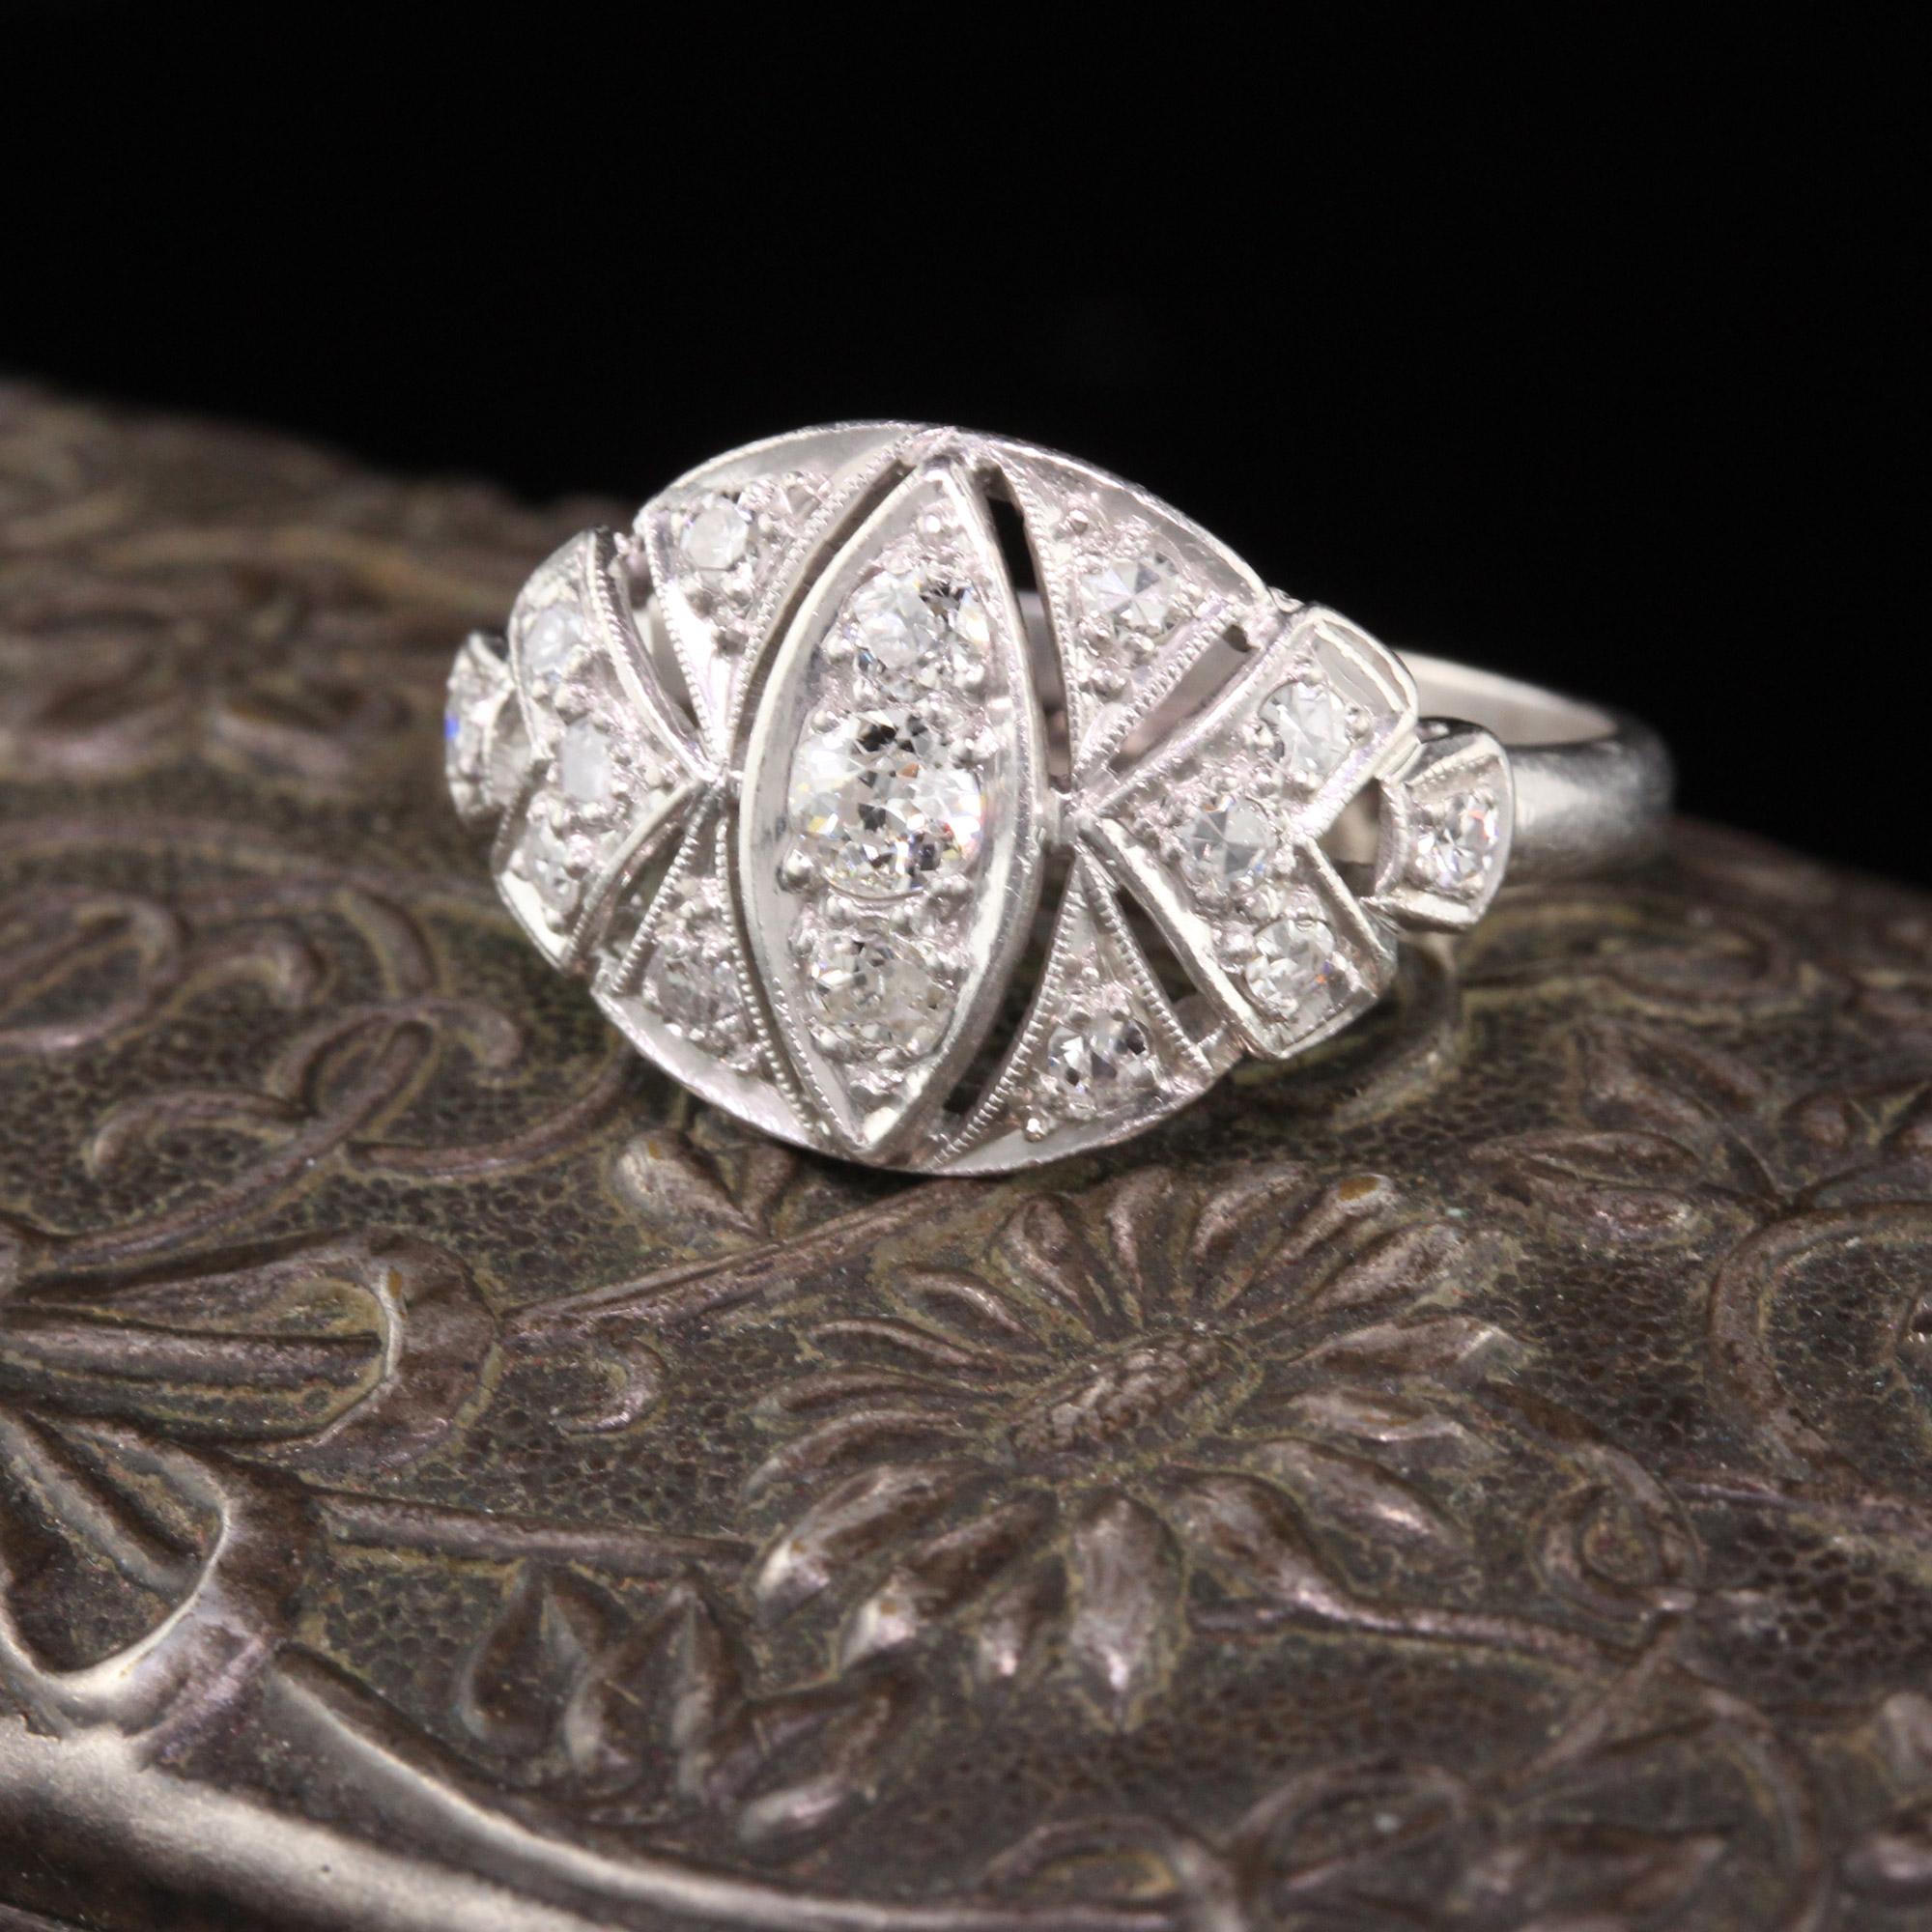 Beautiful Art Deco Platinum & Diamond Ring with a gorgeous design. Three round diamonds create the illusion of a marquise cut diamond in the center. Sits very low to the finger.

#R0290

Metal: Platinum

Weight: 3.9 Grams

Total Diamond Weight: 0.43